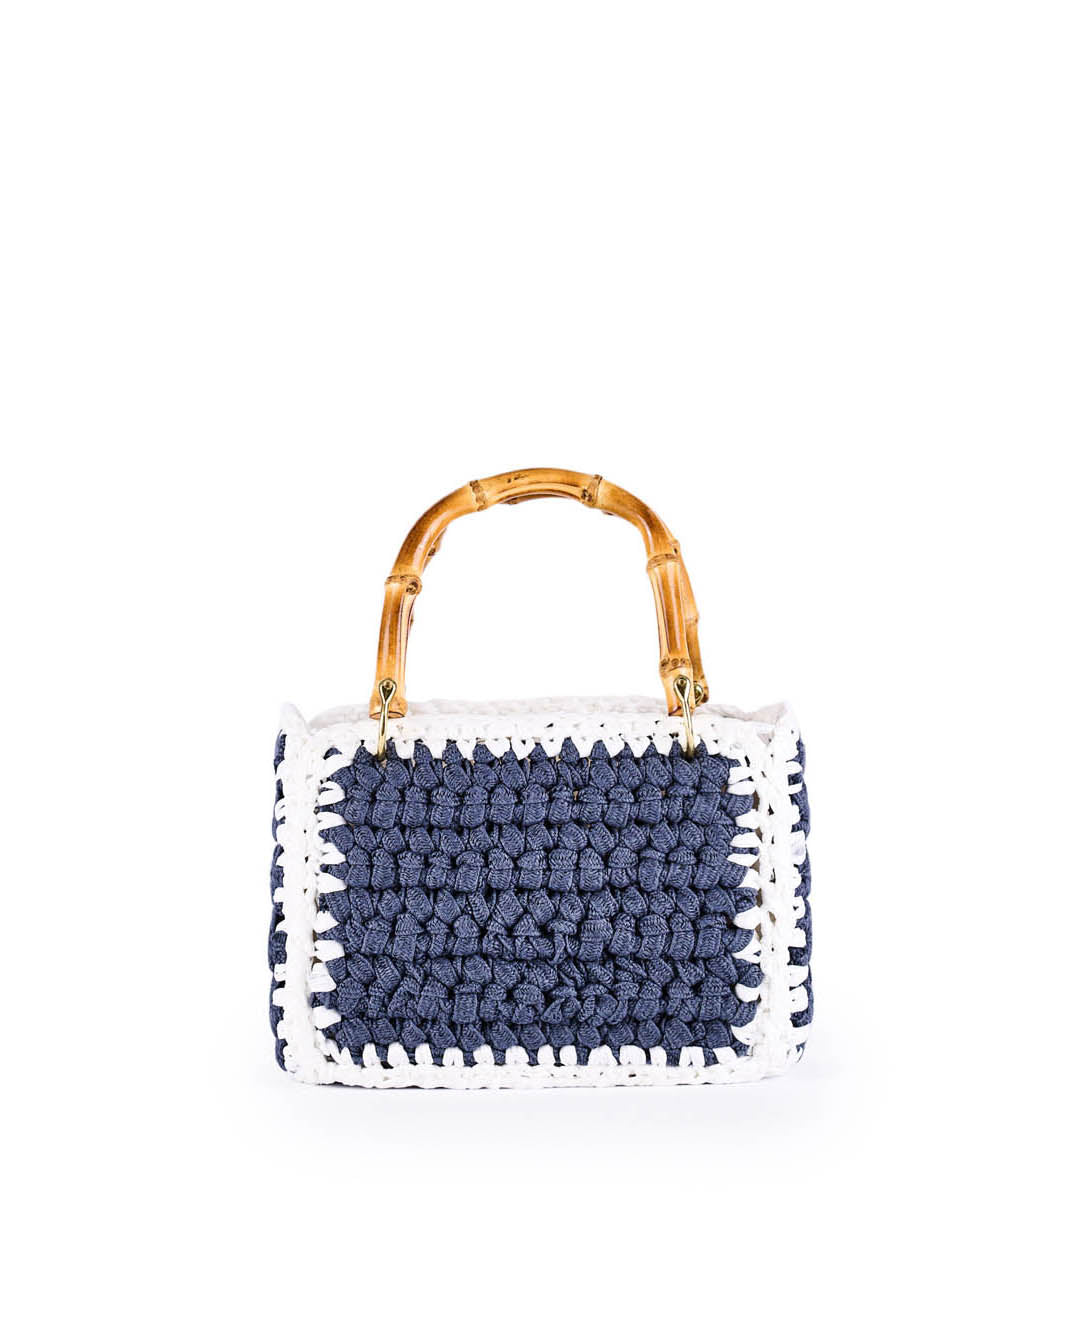 Handwoven navy blue and white tote bag with bamboo handles against white background